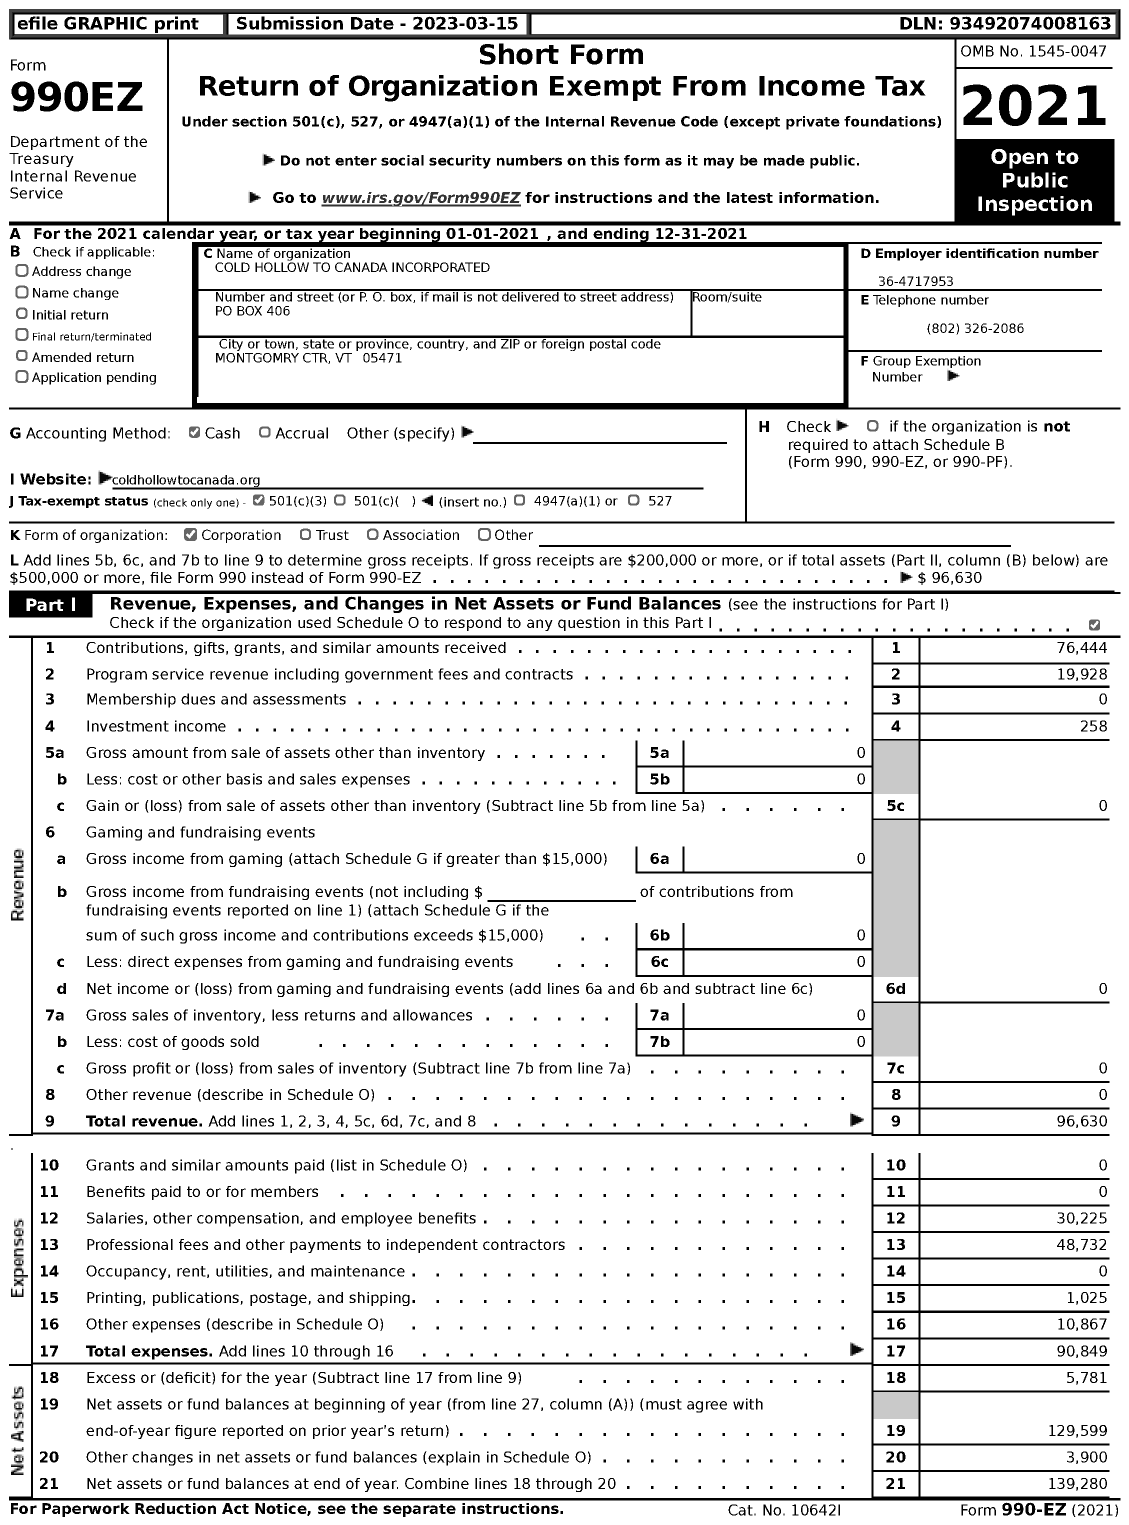 Image of first page of 2021 Form 990EZ for Cold Hollow To Canada Incorporated